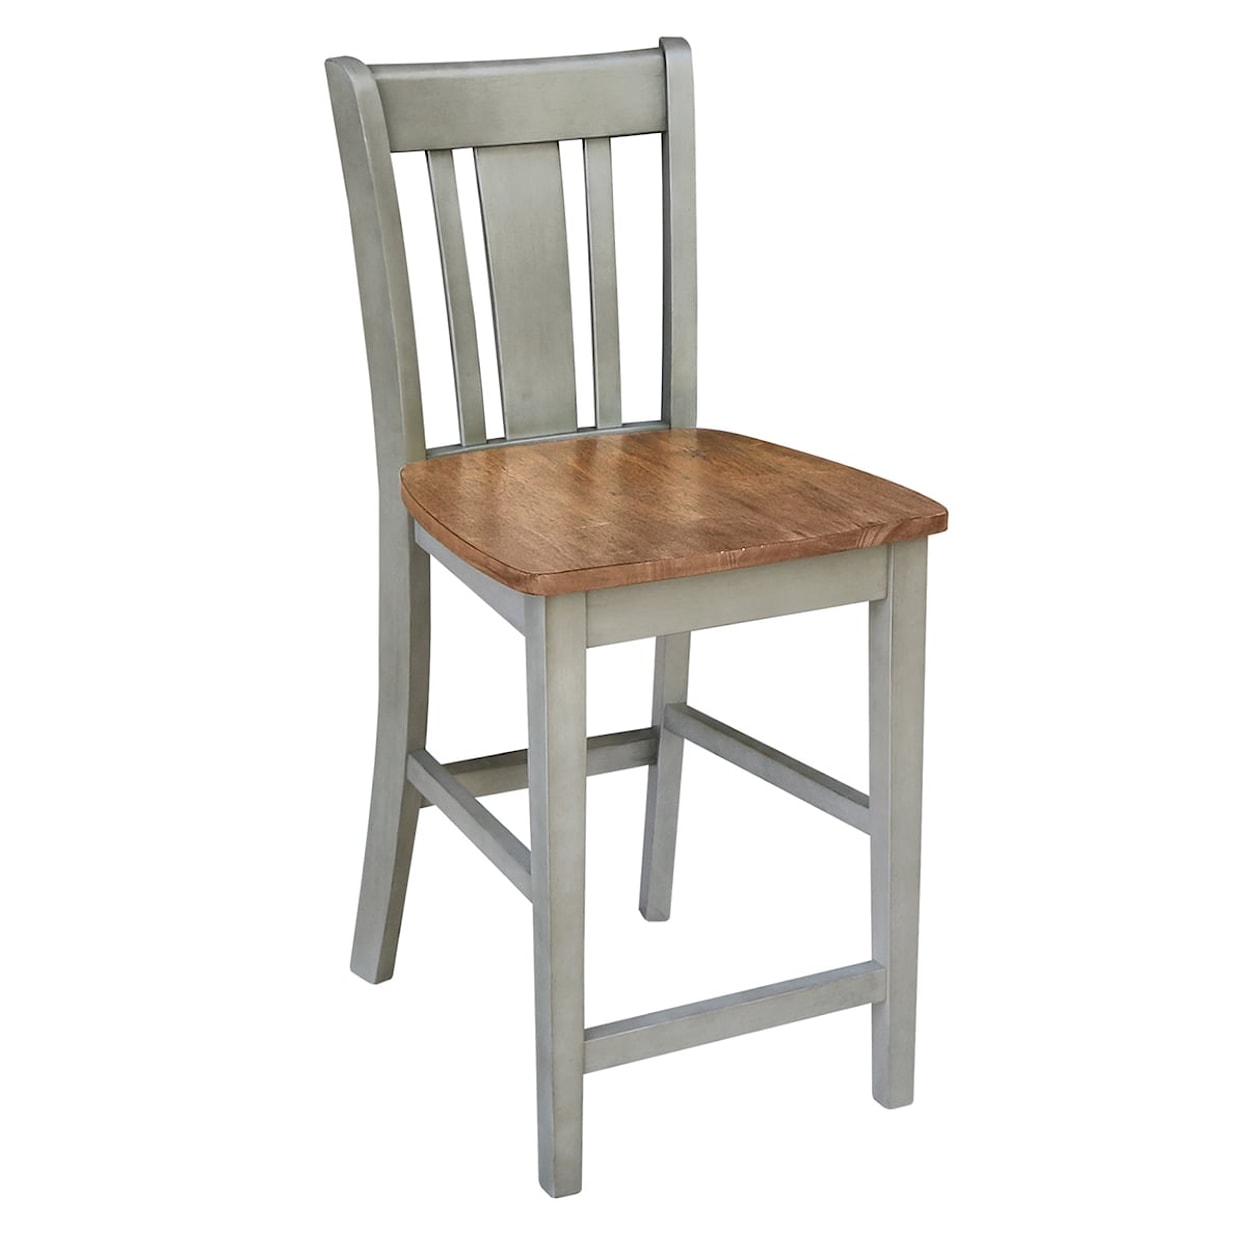 John Thomas Dining Essentials San Remo Stool in Hickory Stone